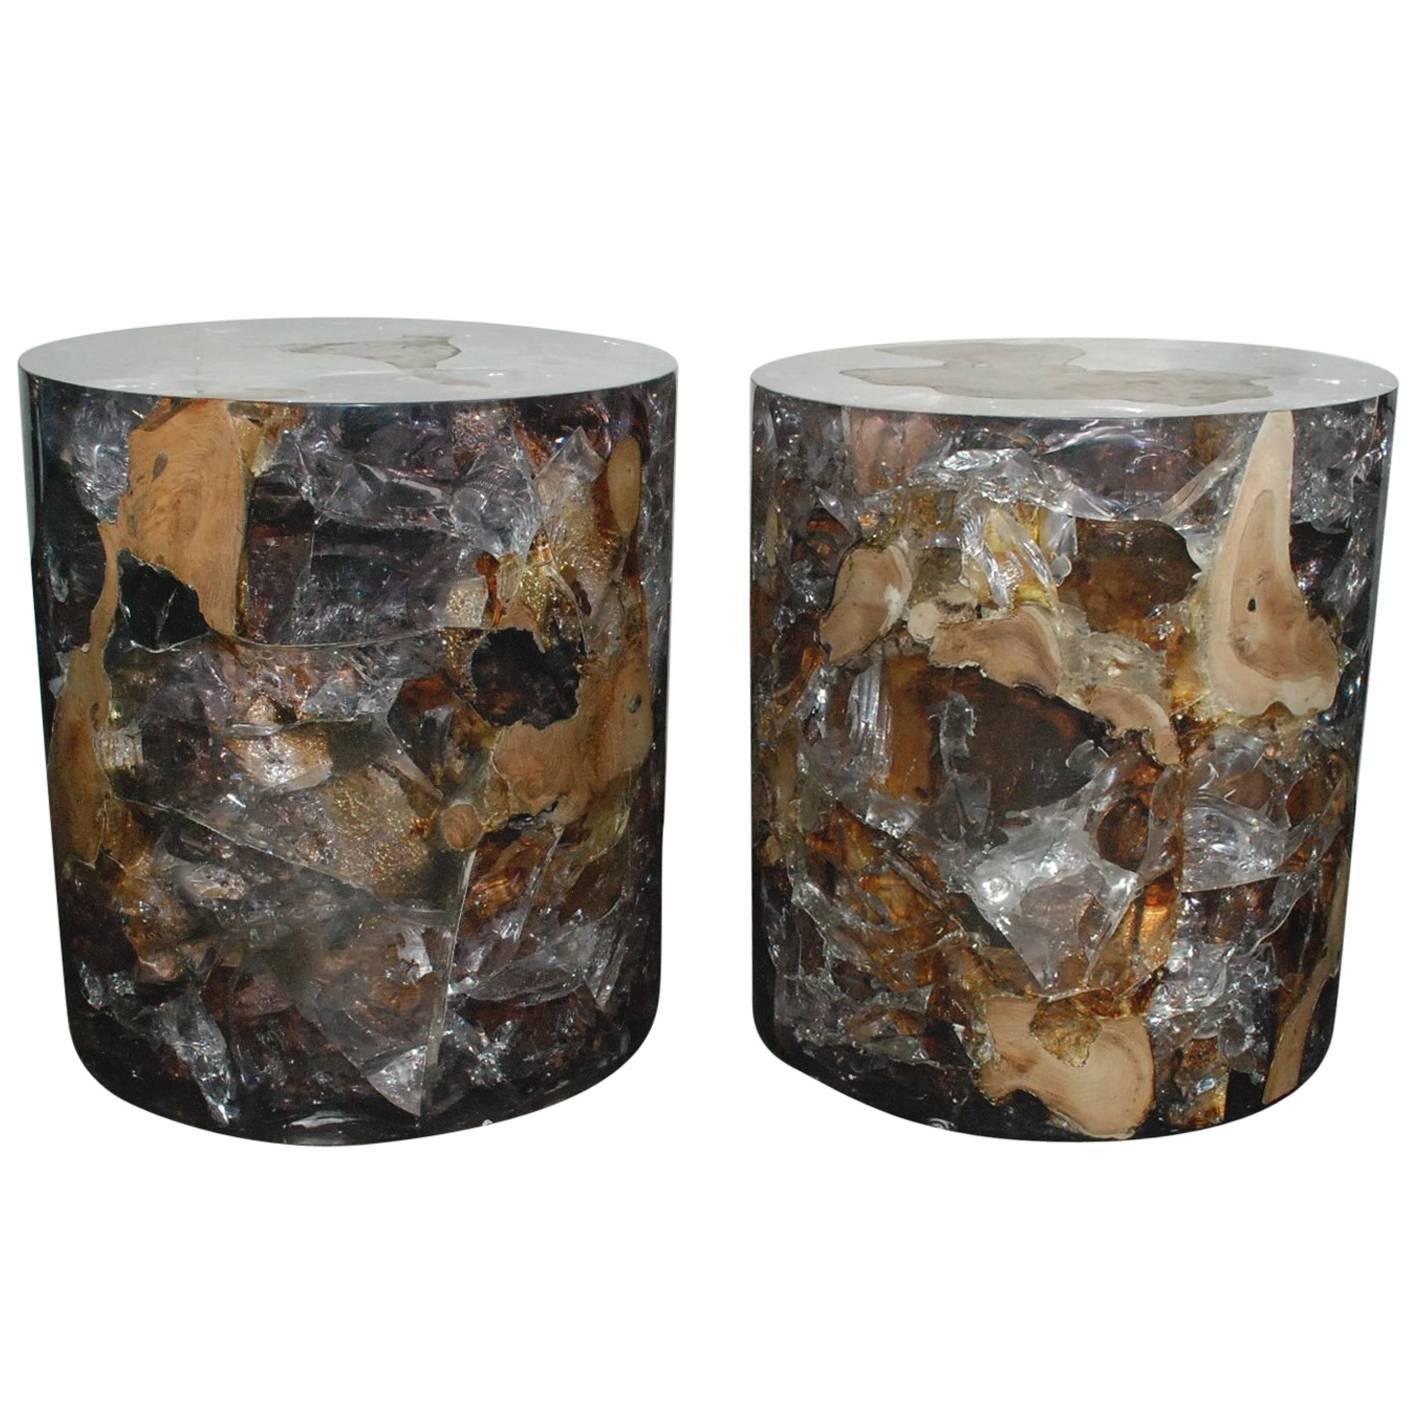 Pair of Cracked Resin Side Tables